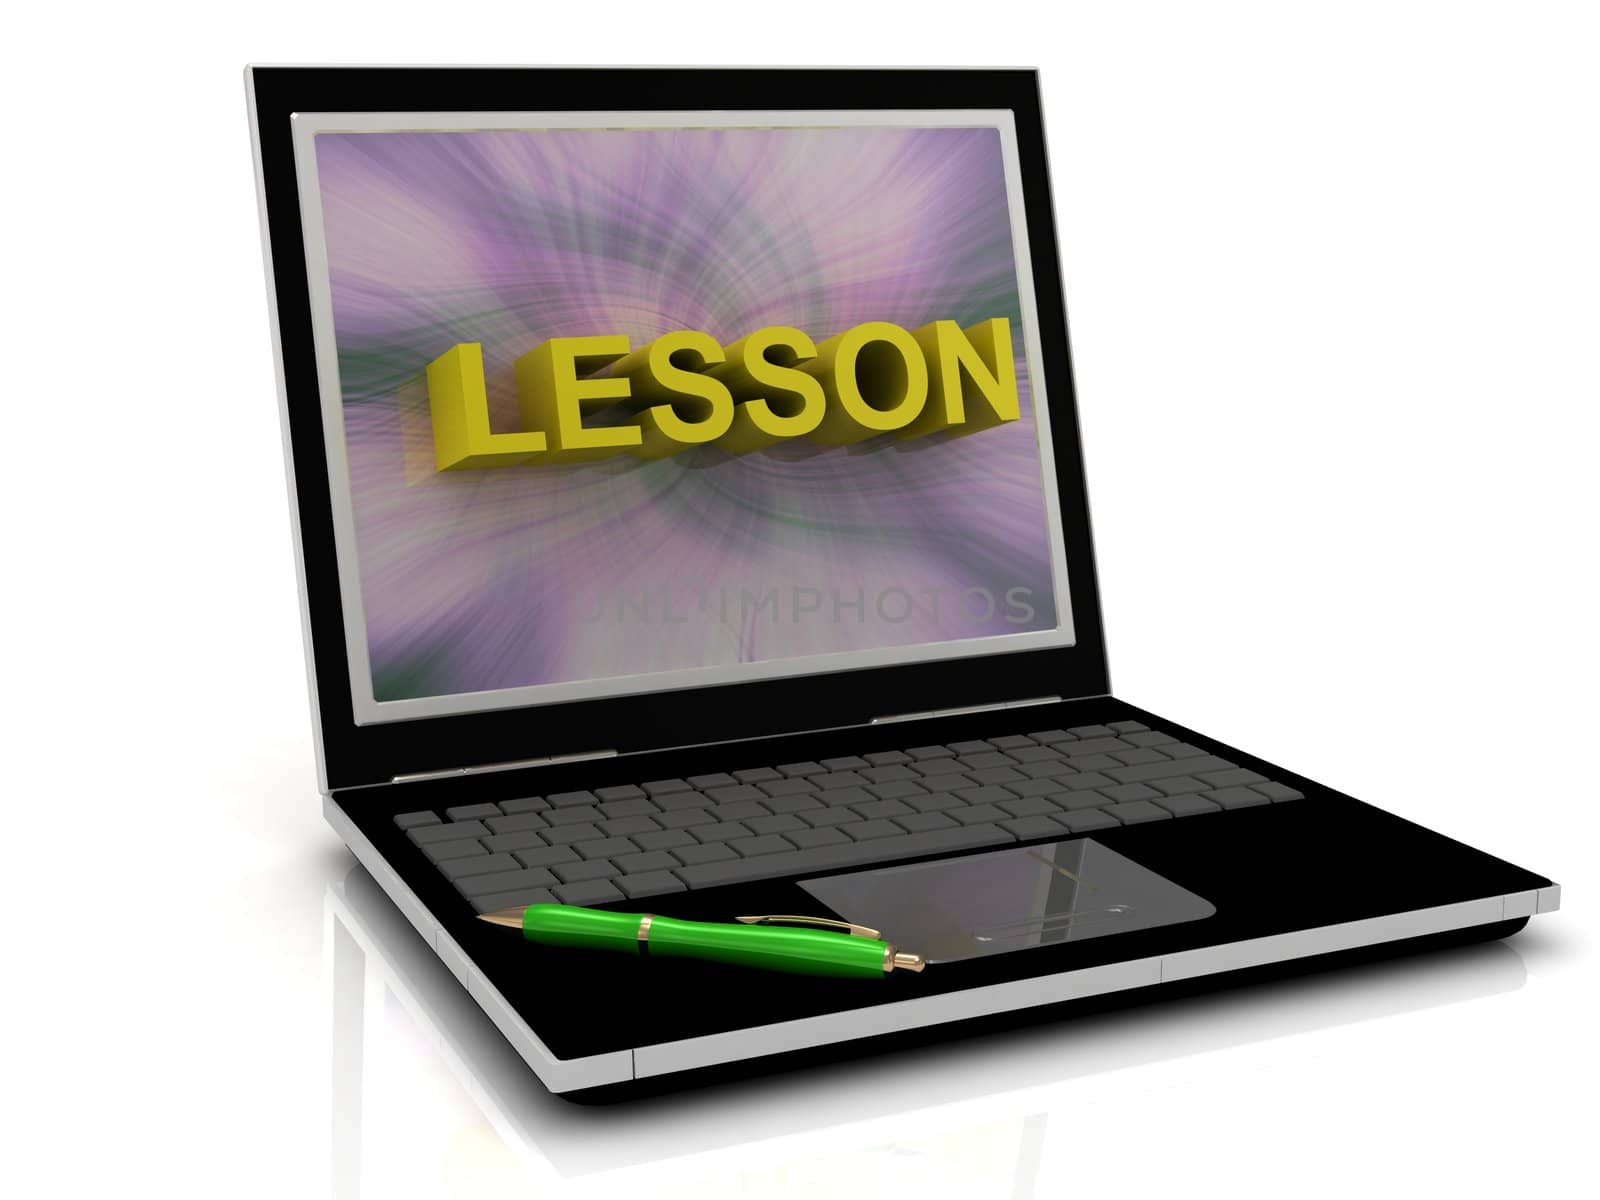 LESSON message on laptop screen in big letters. 3D illustration isolated on white background